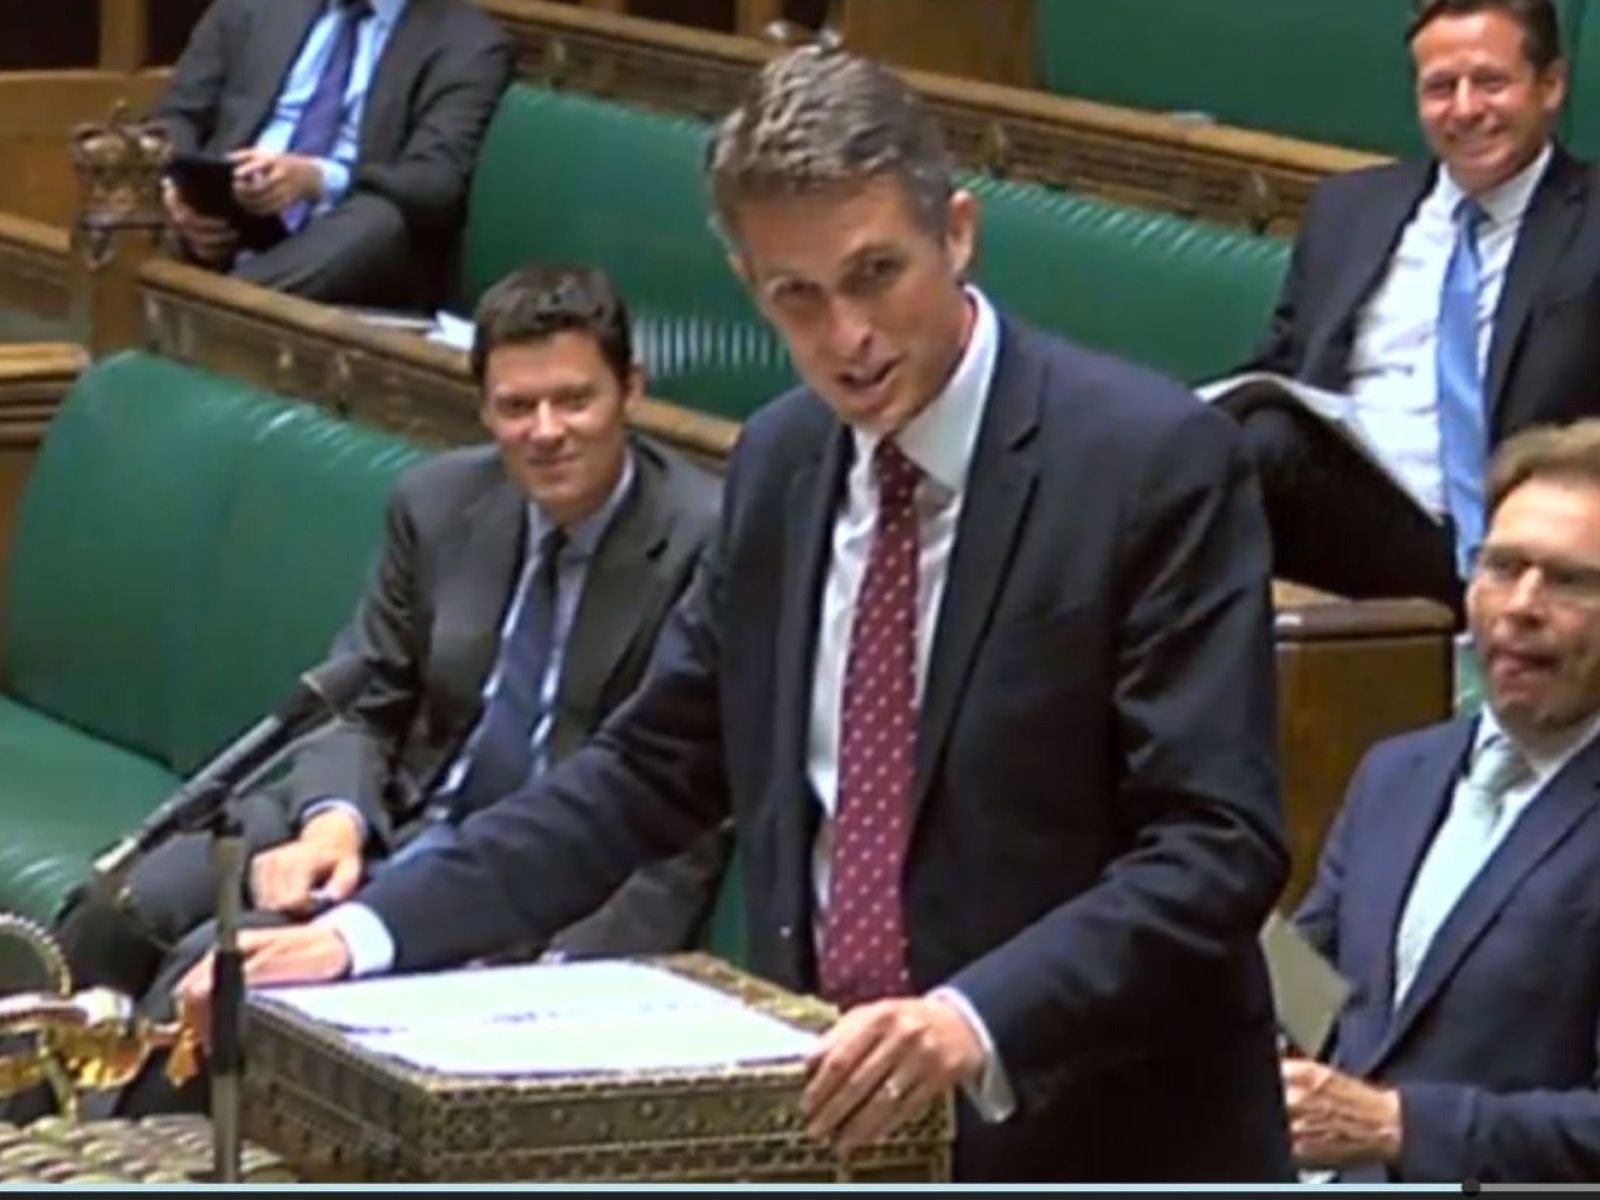 Gavin Williamson Interrupted by Siri During Commons Statement